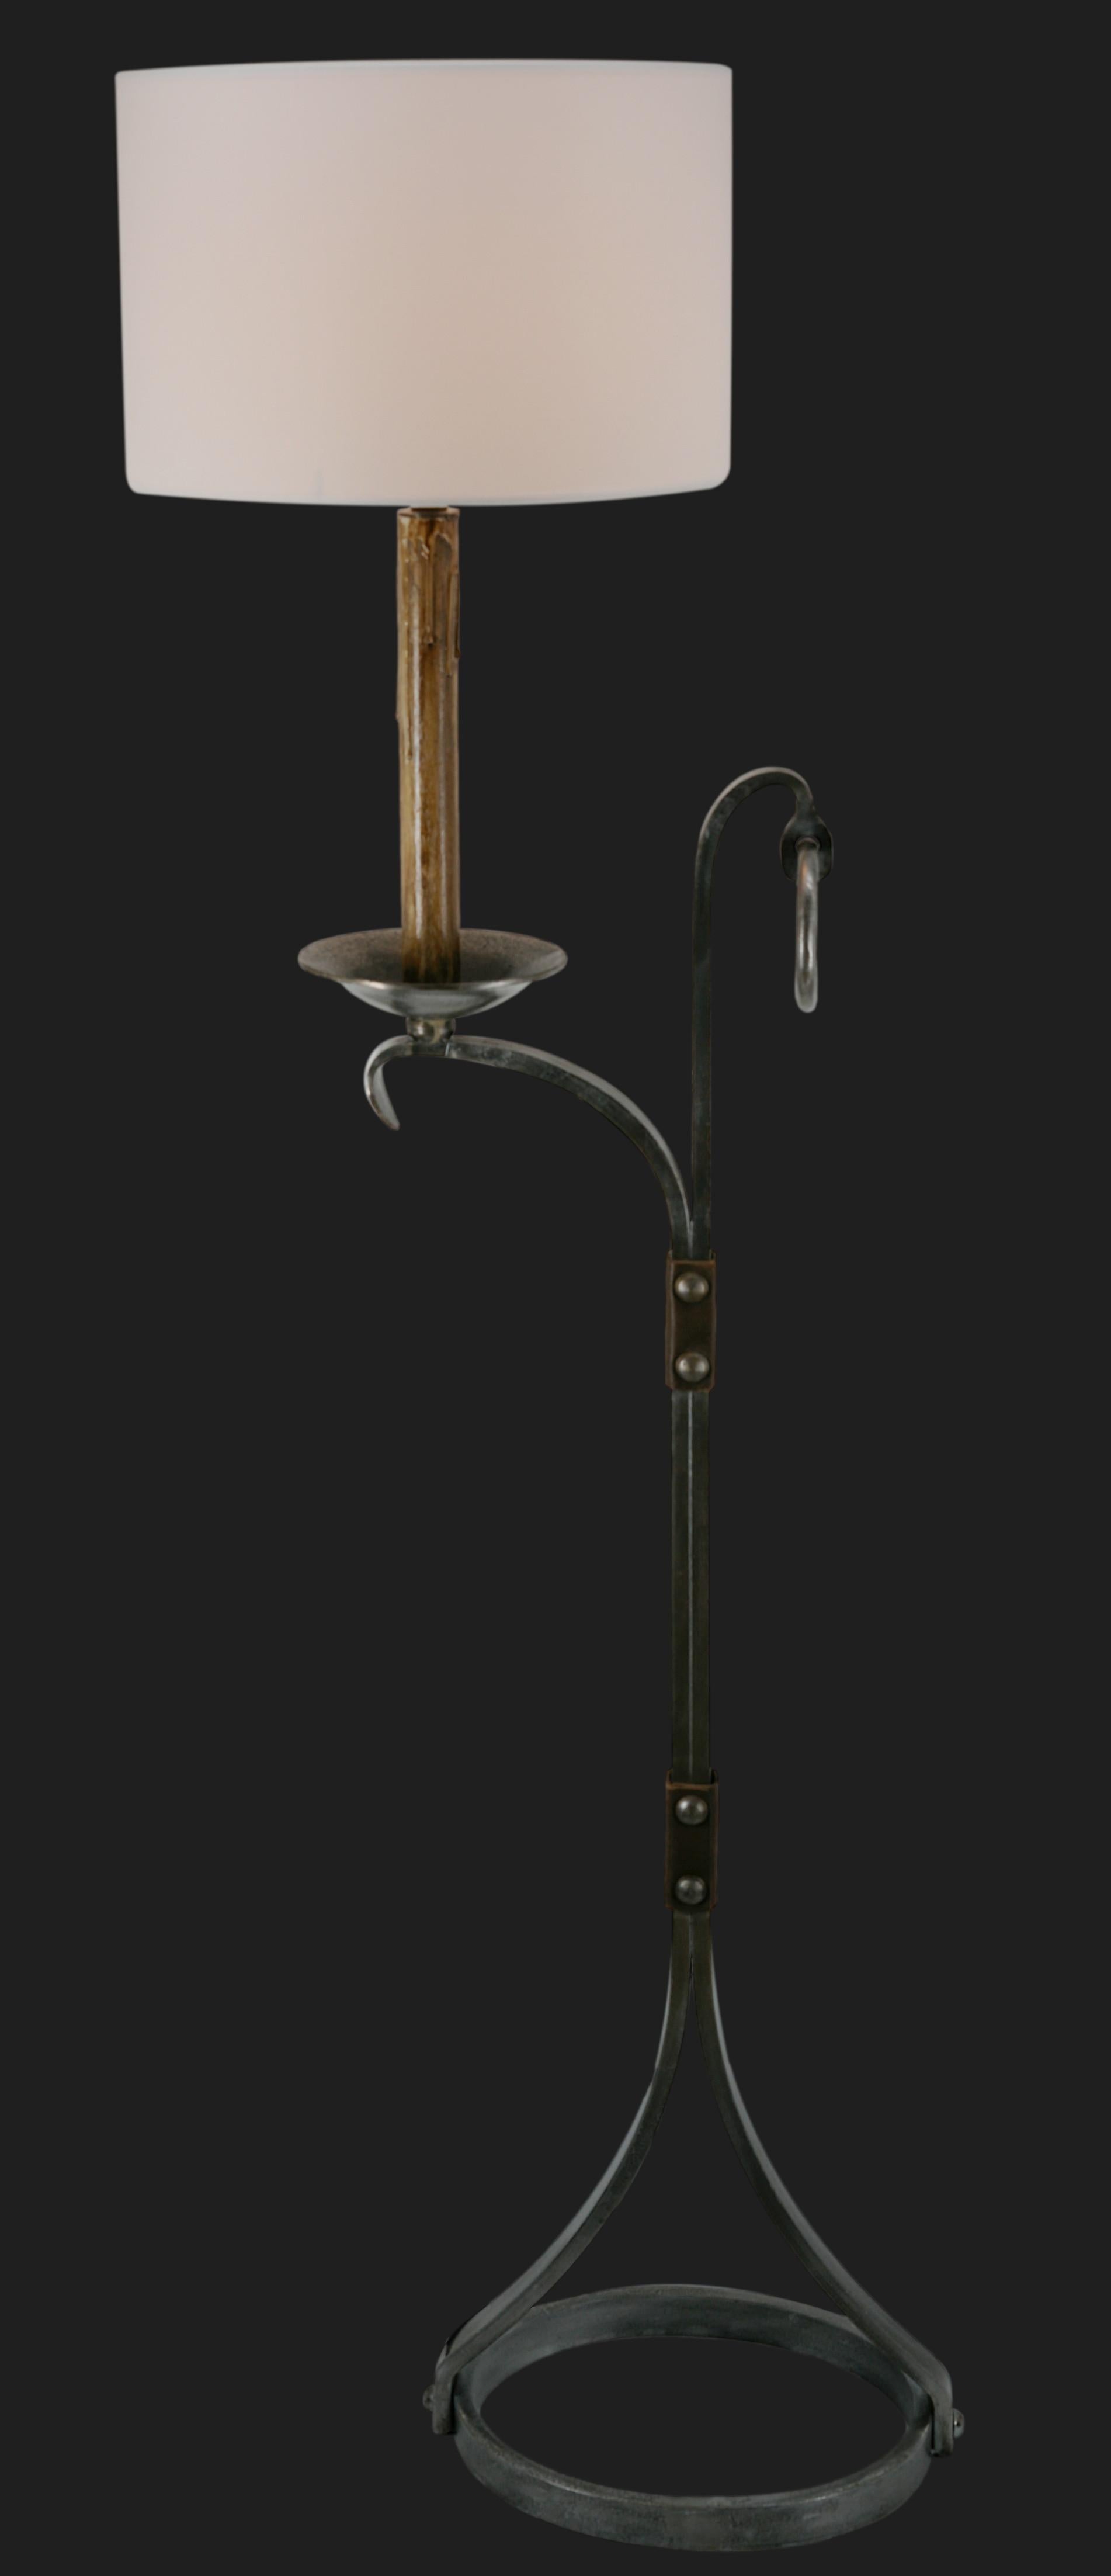 French midcentury floor lamp by Jean-Pierre Ryckaert, Paris, 1950s. Wrought-iron and leather. Measurements without shade - height with socket : 51